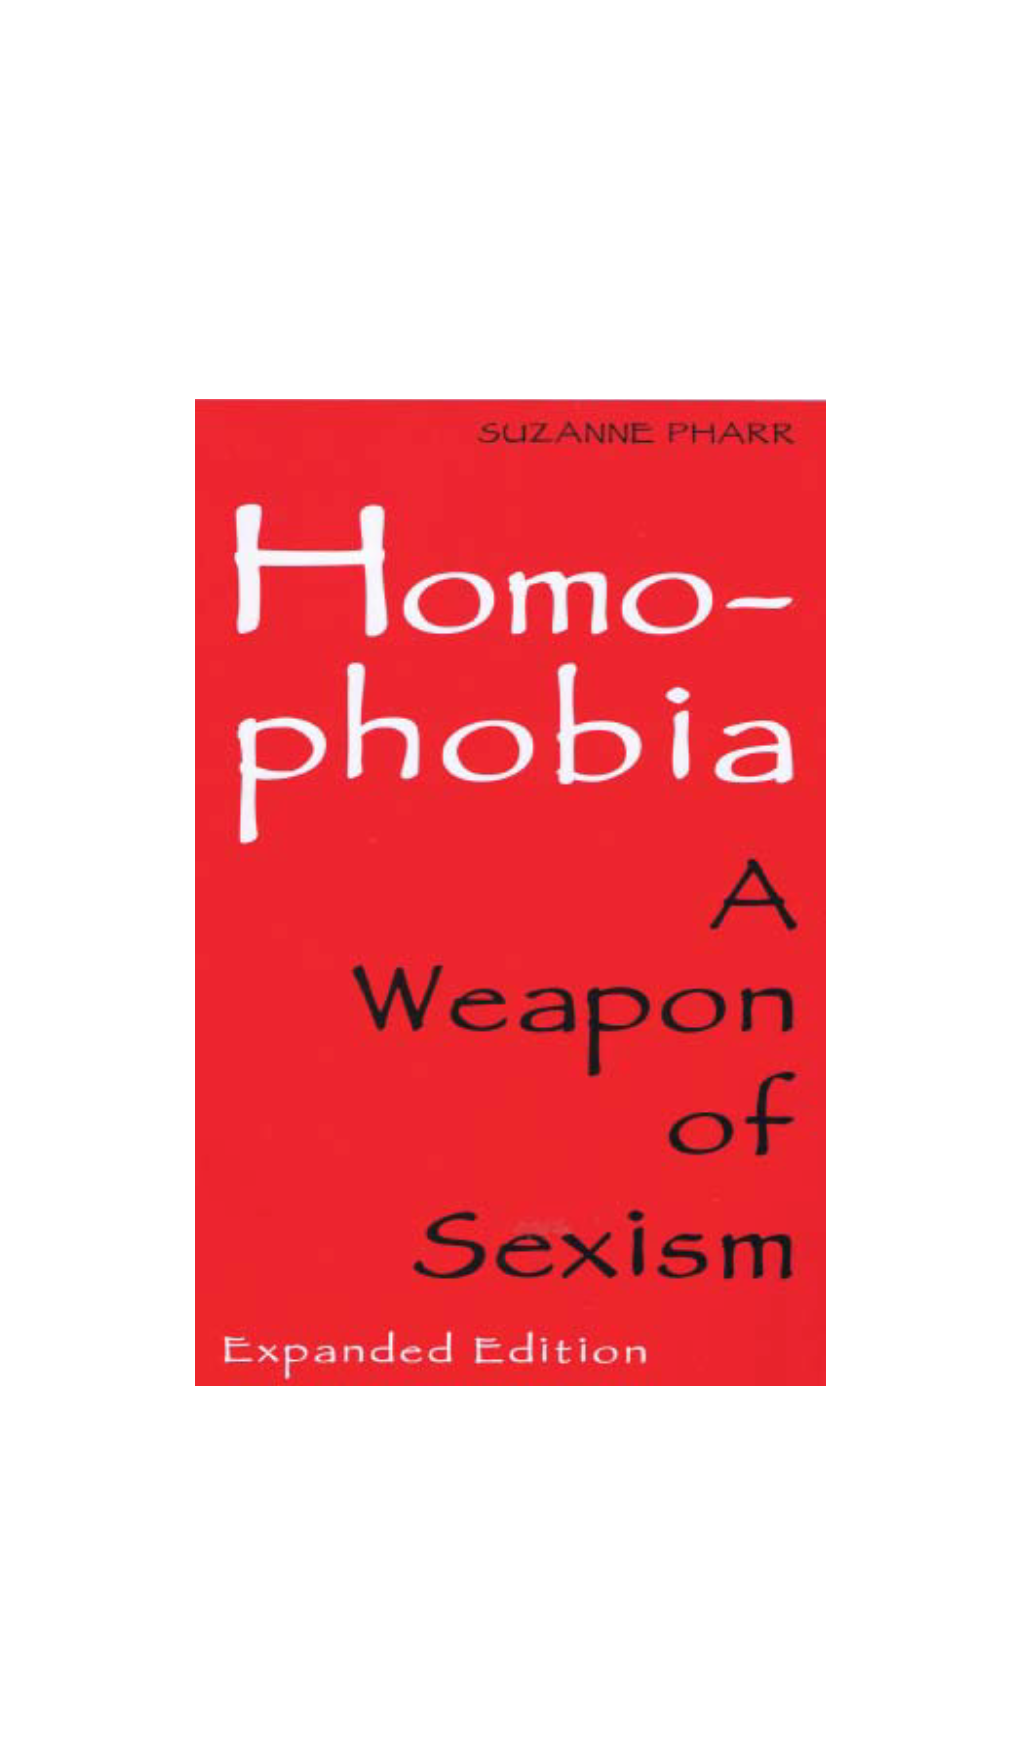 Homophobia: a Weapon of Sexism